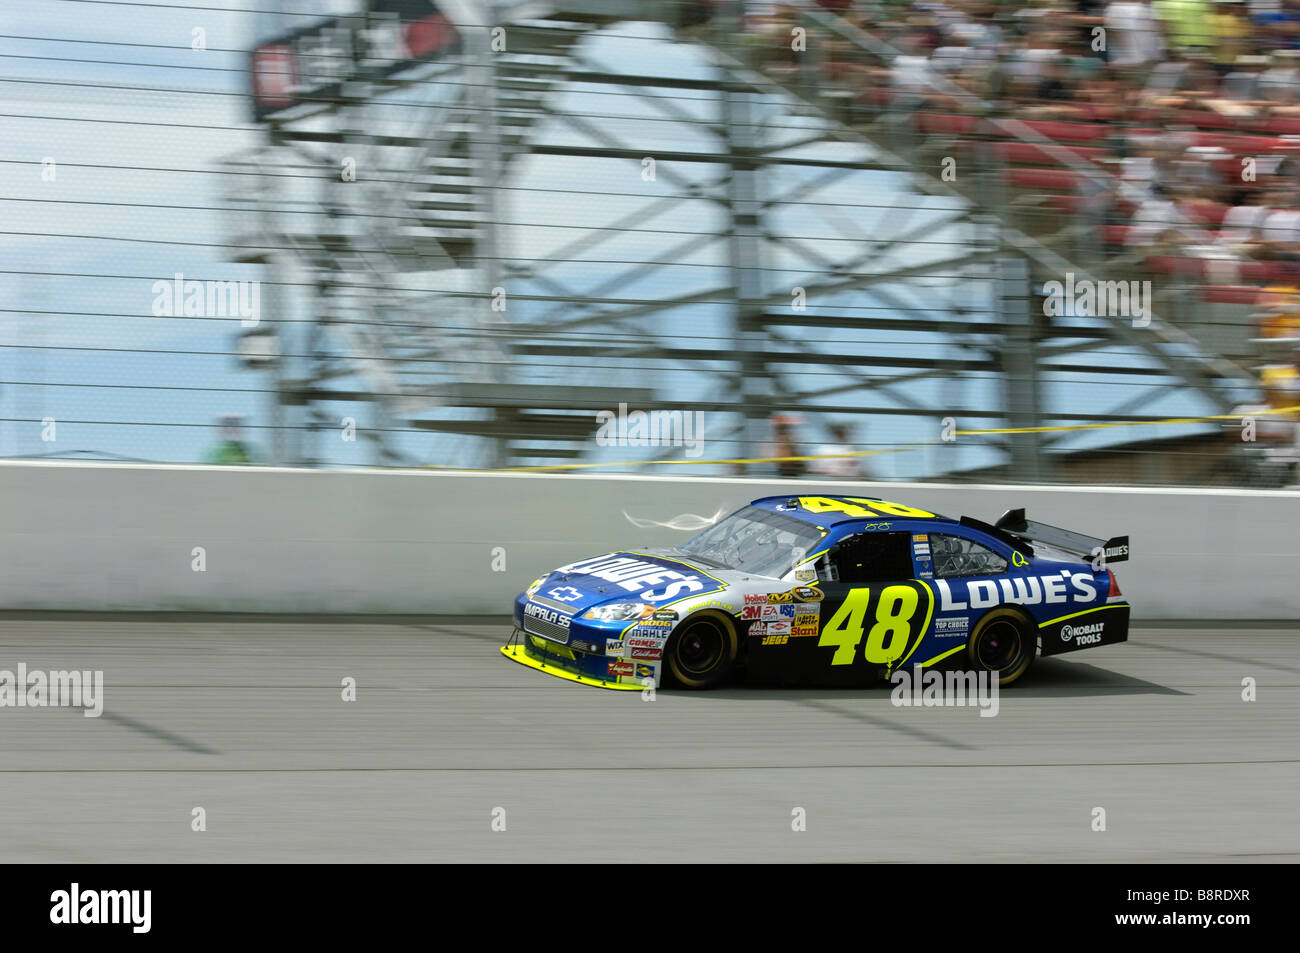 Jimmie Johnson races in the LifeLock 400 NASCAR race at Michigan International Speedway 2008 Stock Photo